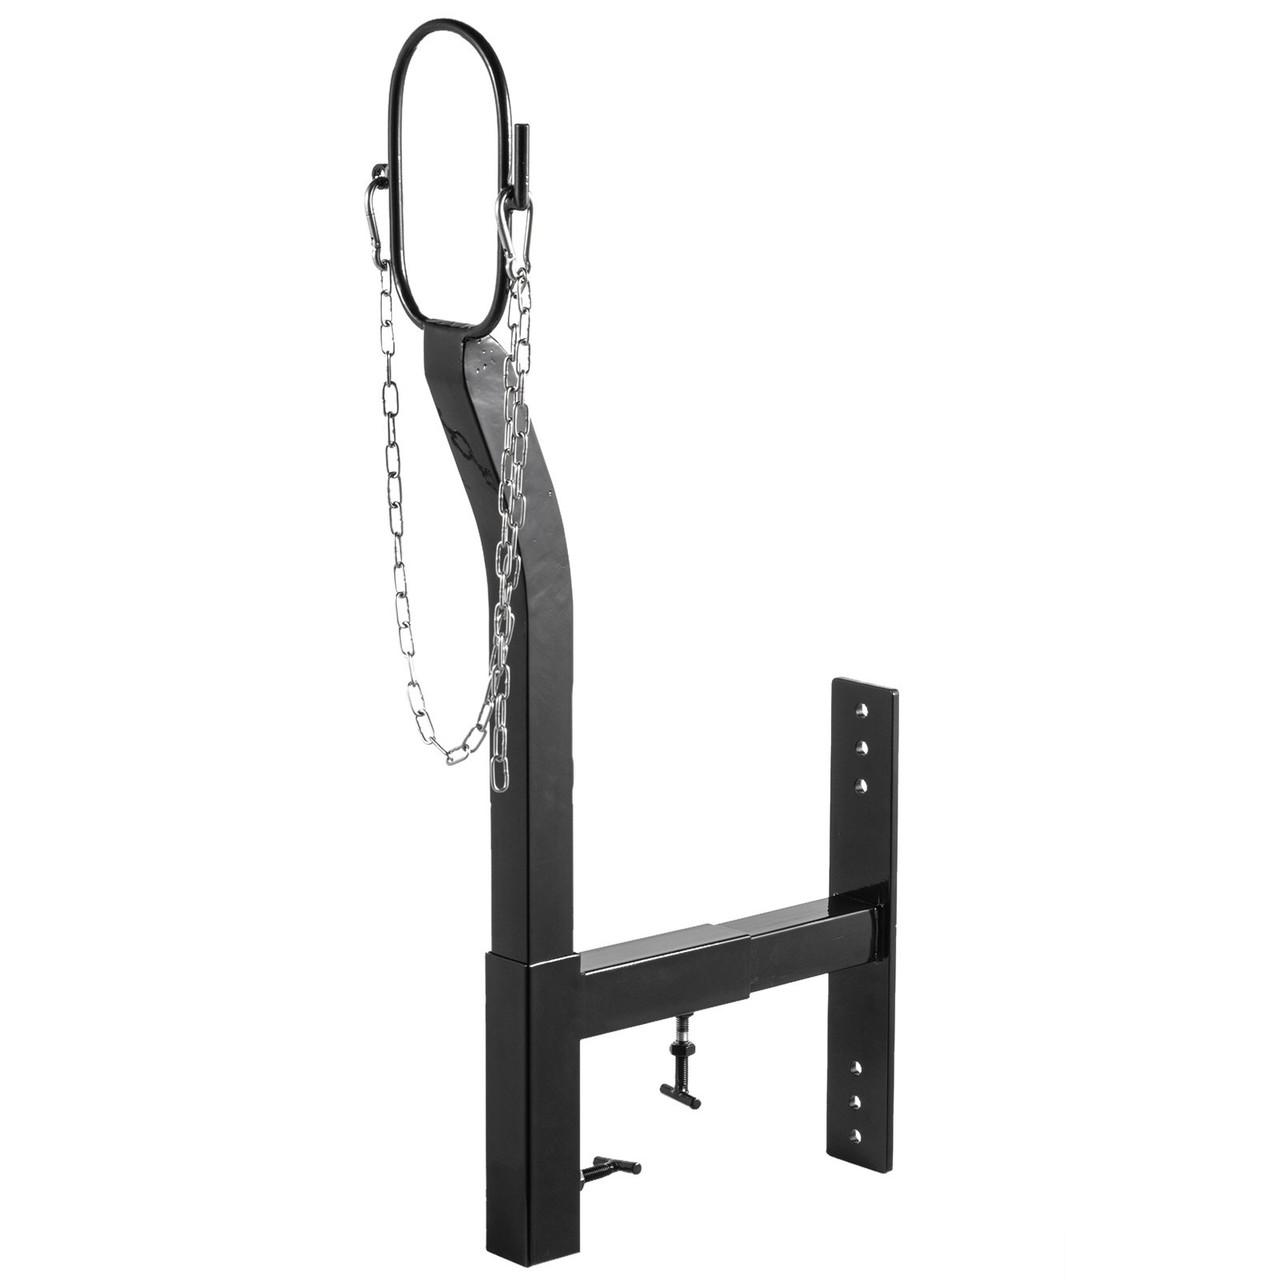 Livestock Stand Steel Gate Attachment Nose Loop Headpiece, 9.8inch Height and Trimming Stand 5.9inch Length Adjustable, Nose Loop Goat Trimming Stands, Sheep Shearing Stand, for Sheep & Goats